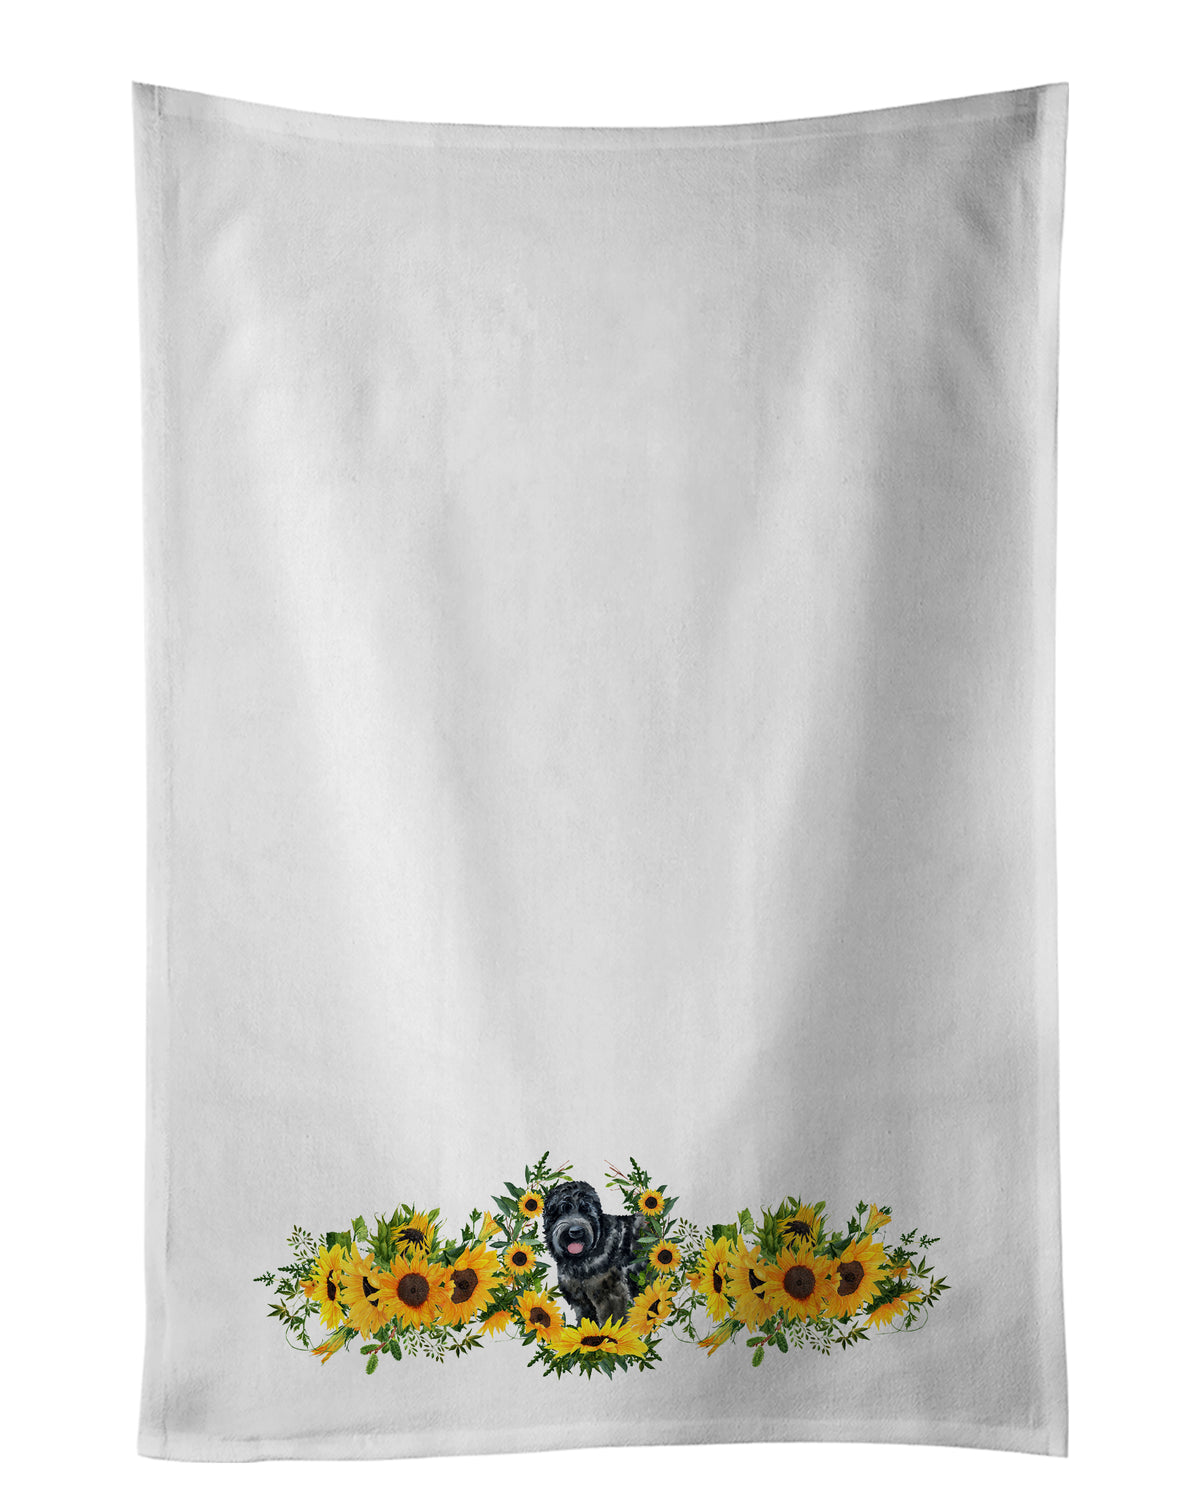 Buy this Black Russian Terrier in Sunflowers White Kitchen Towel Set of 2